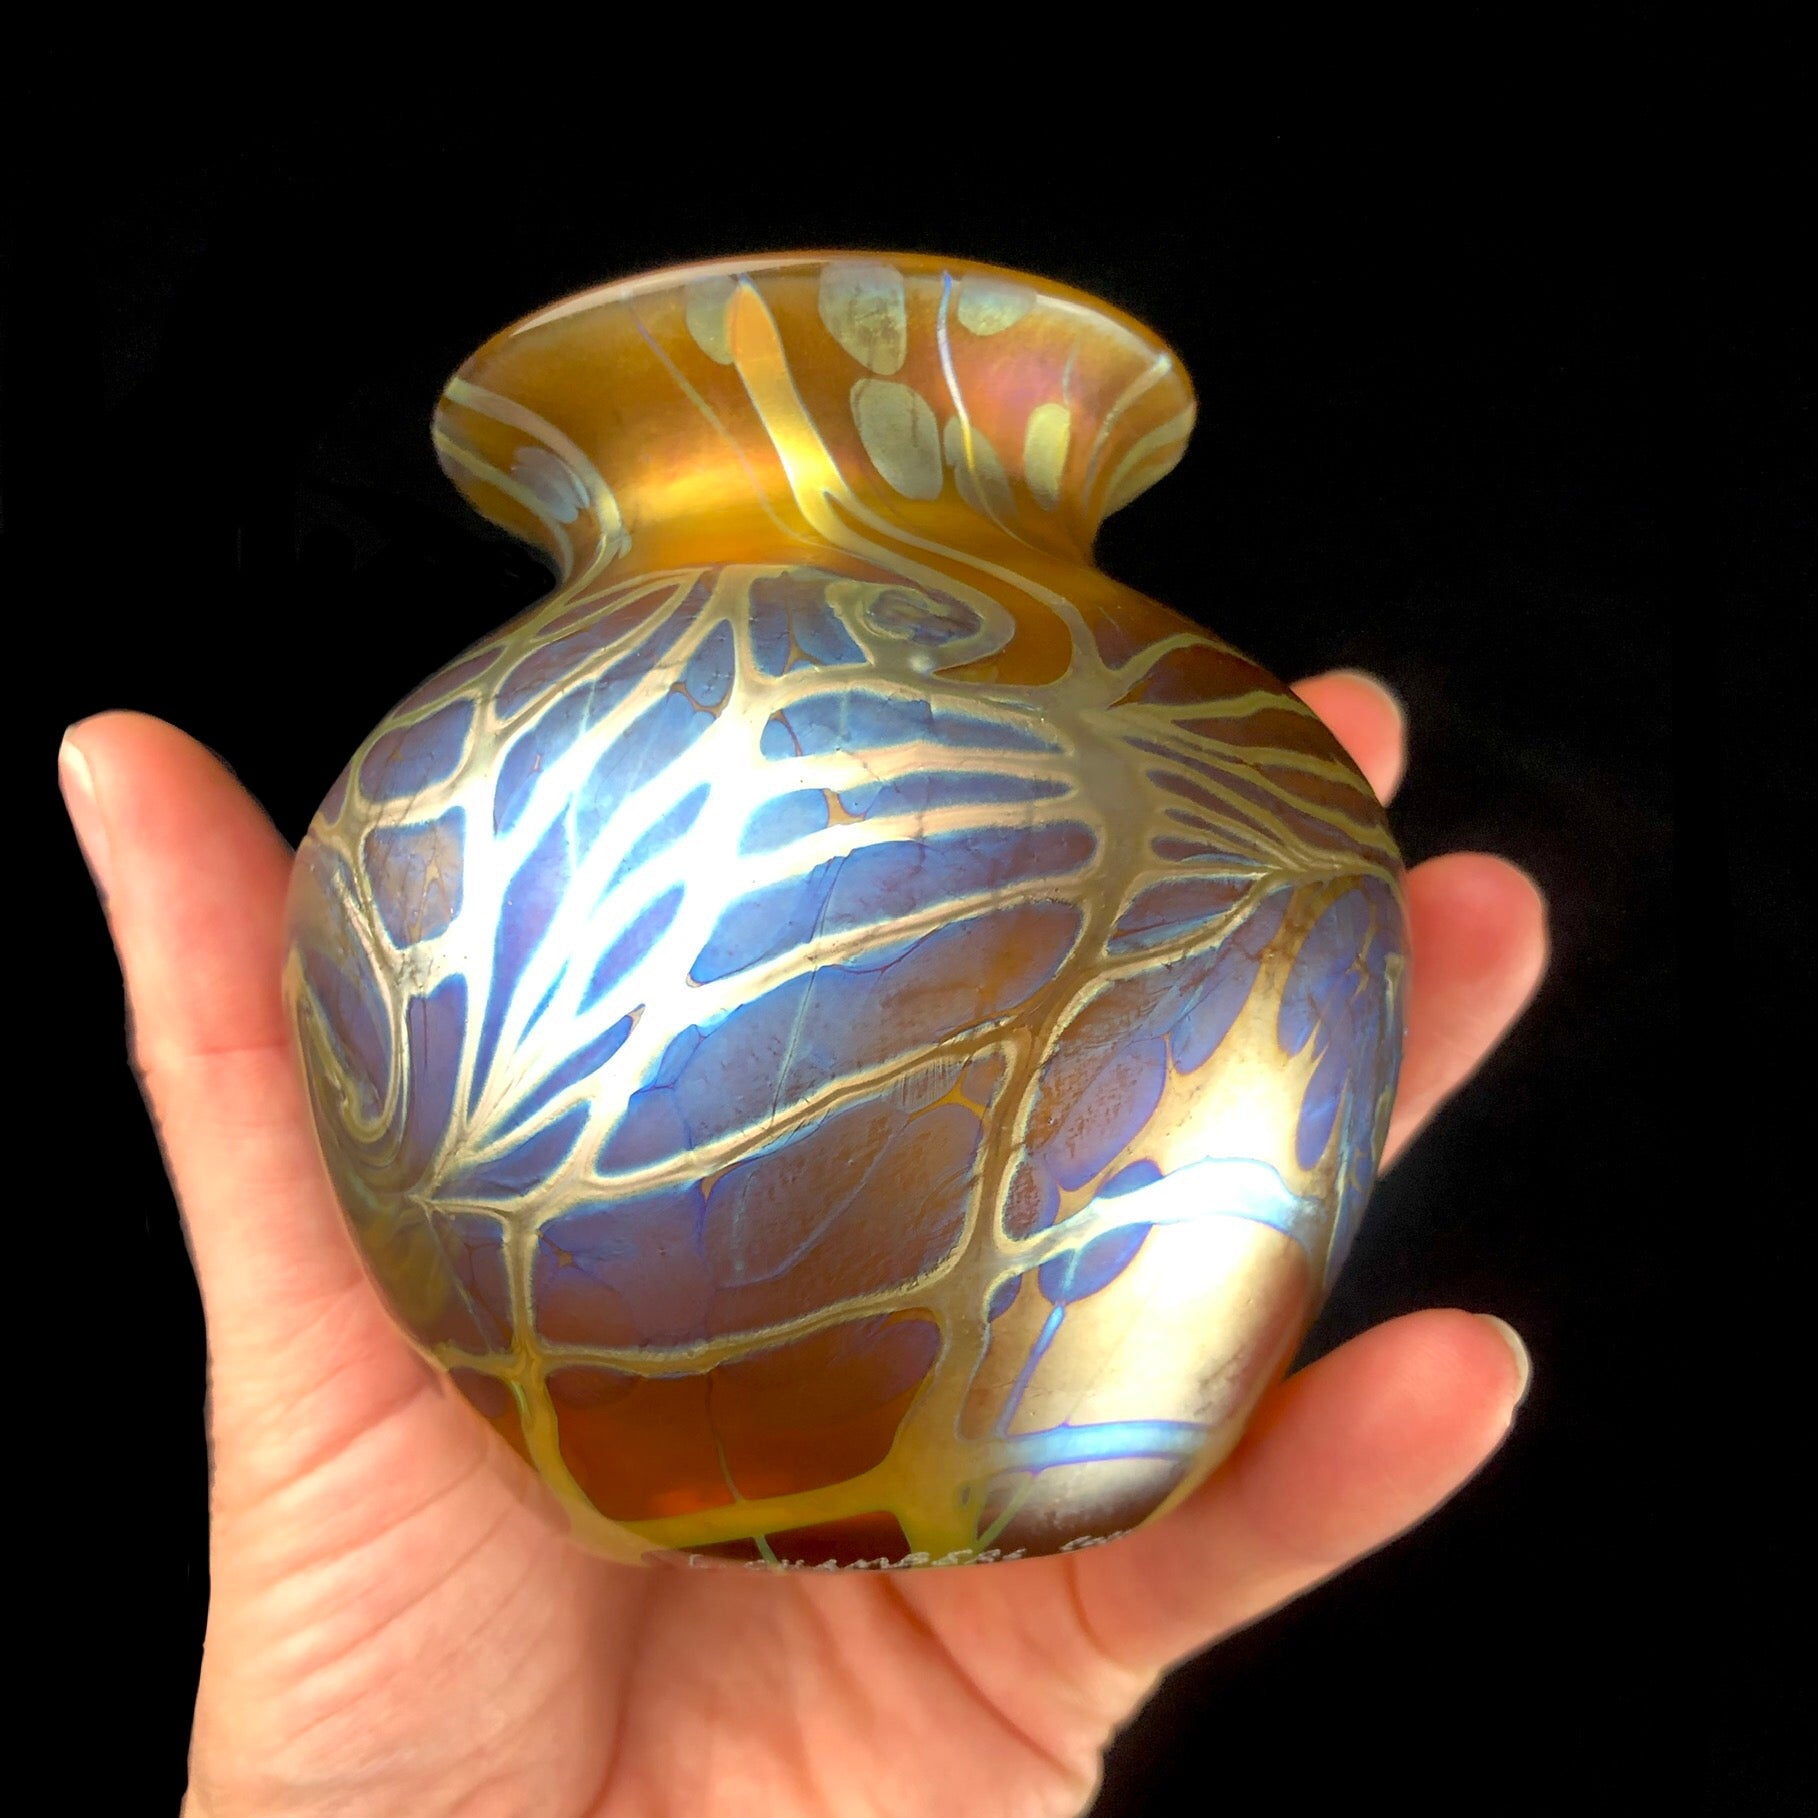 Amber Starry Night Vase shown in hand